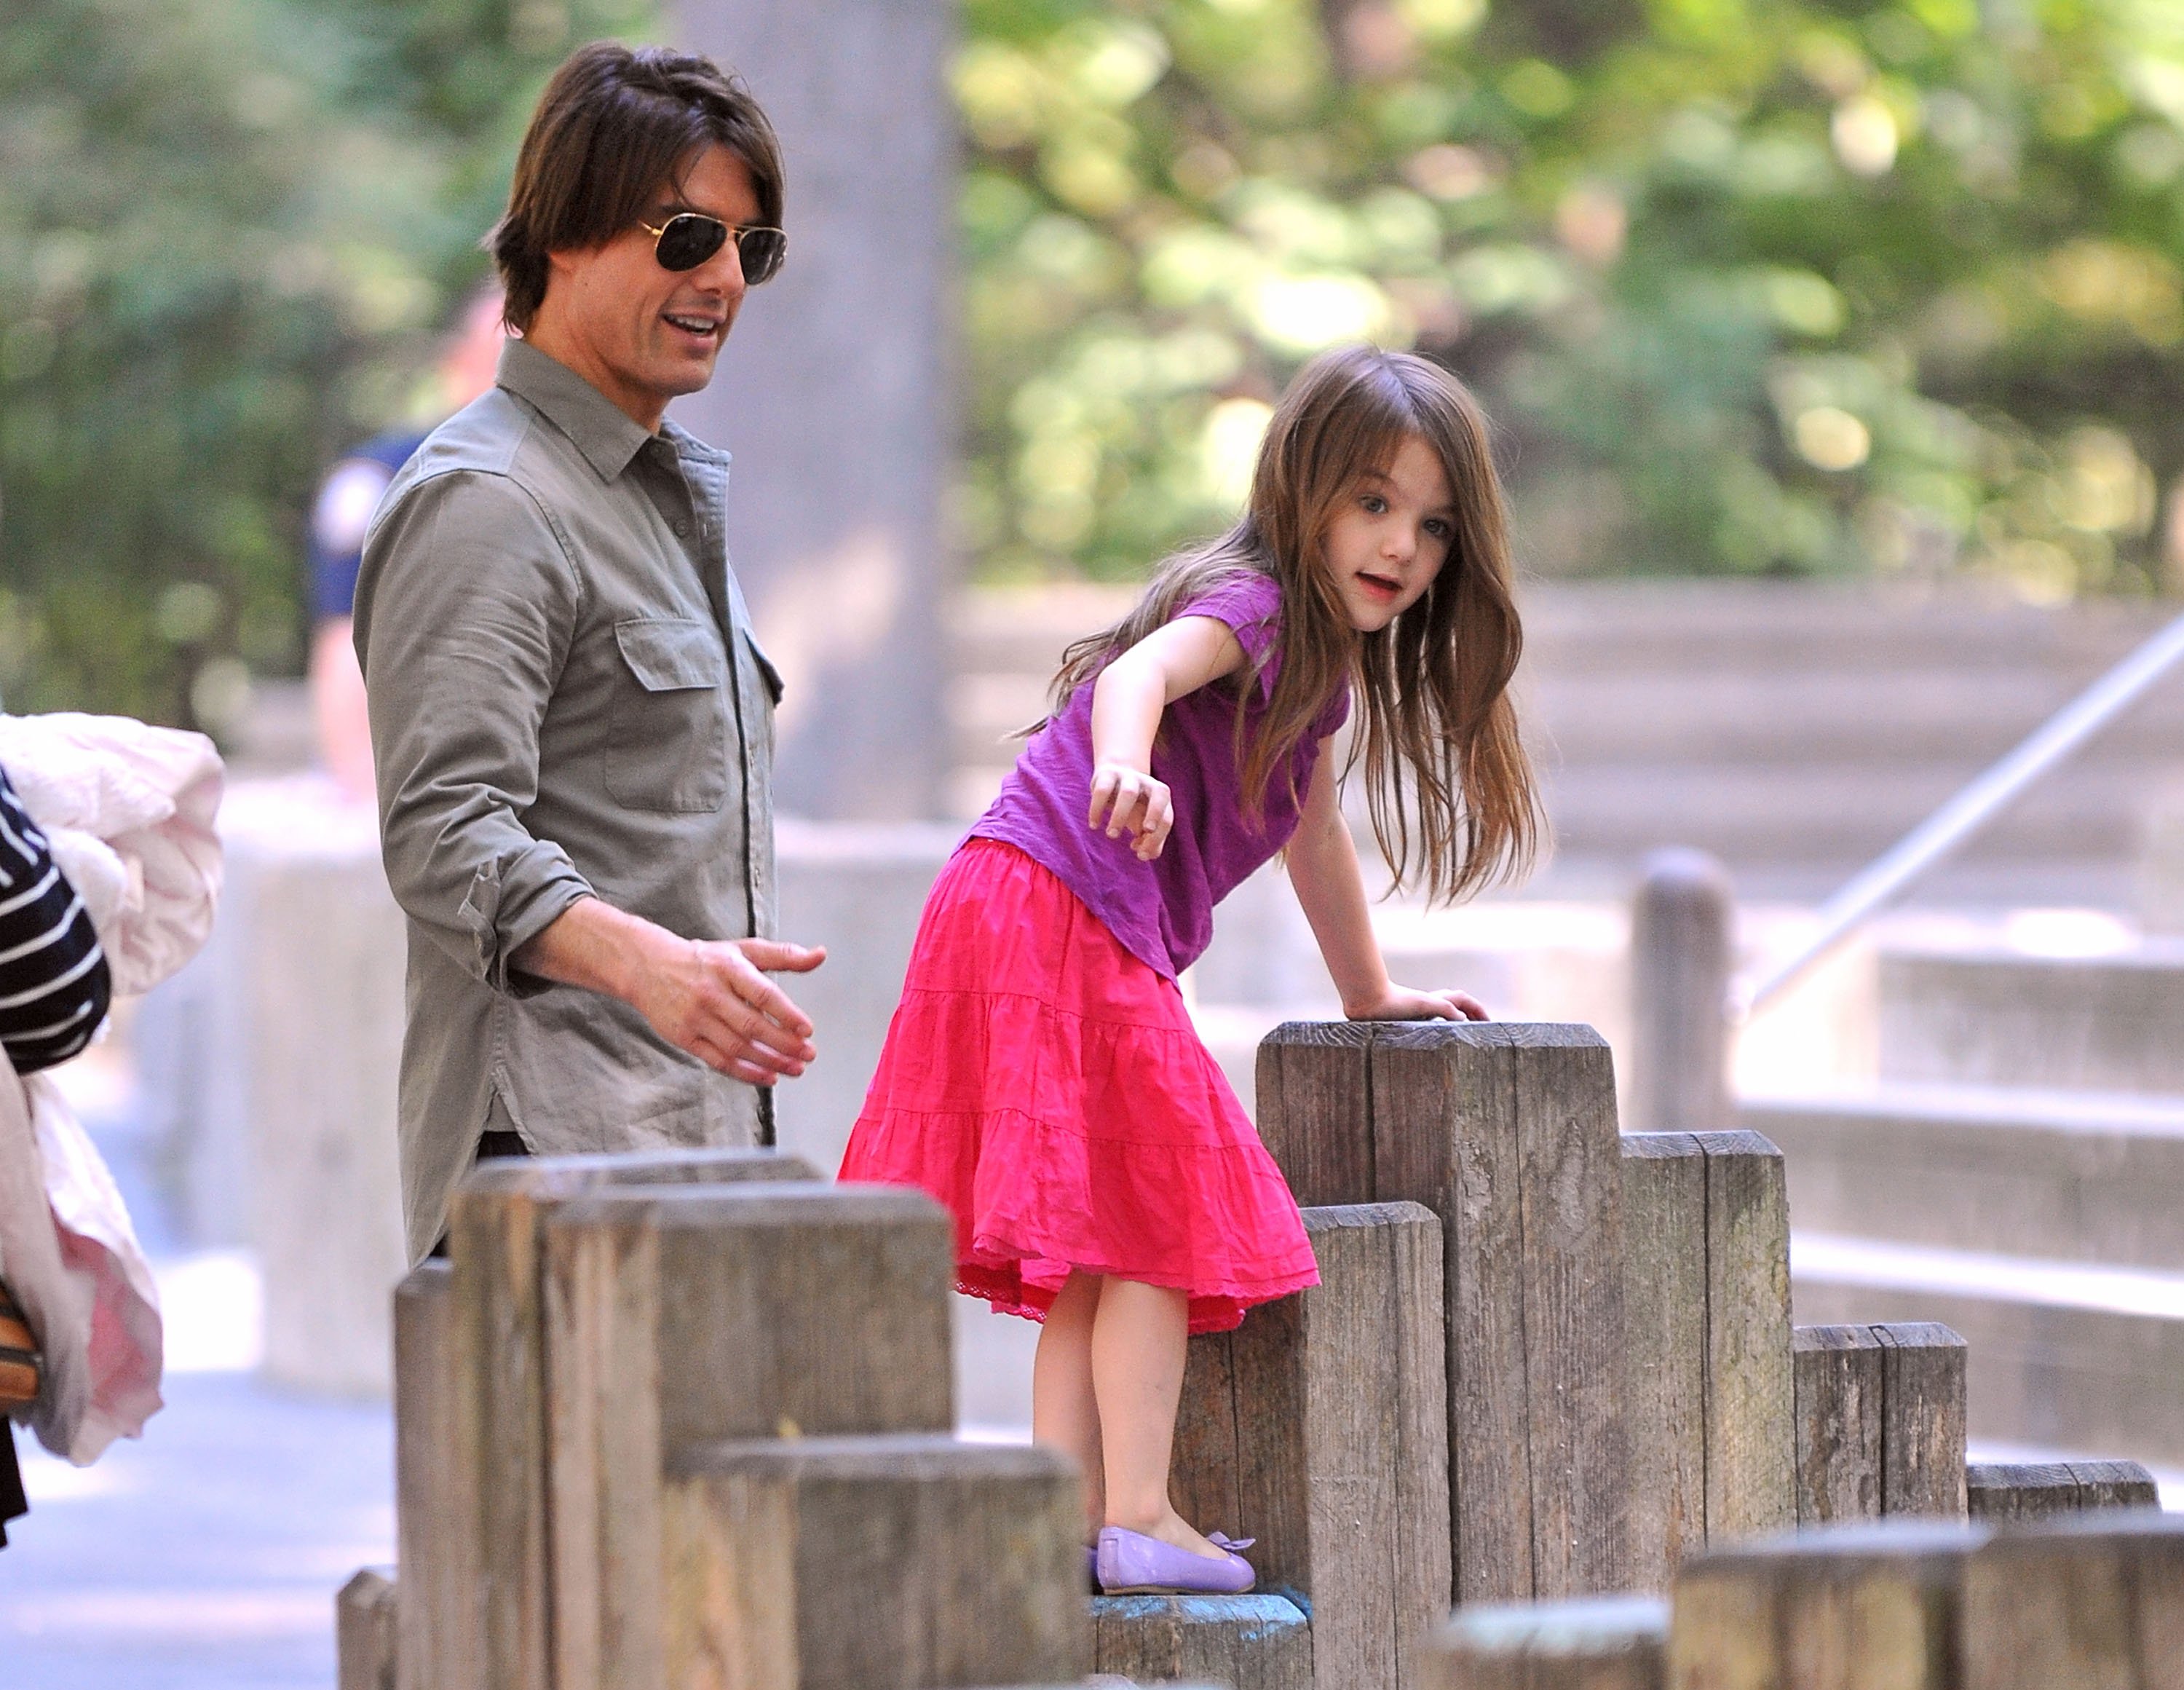 Tom Cruise and Suri Cruise visit a Central Park West playground on September 7, 2010 in New York City. | Source: Getty Images